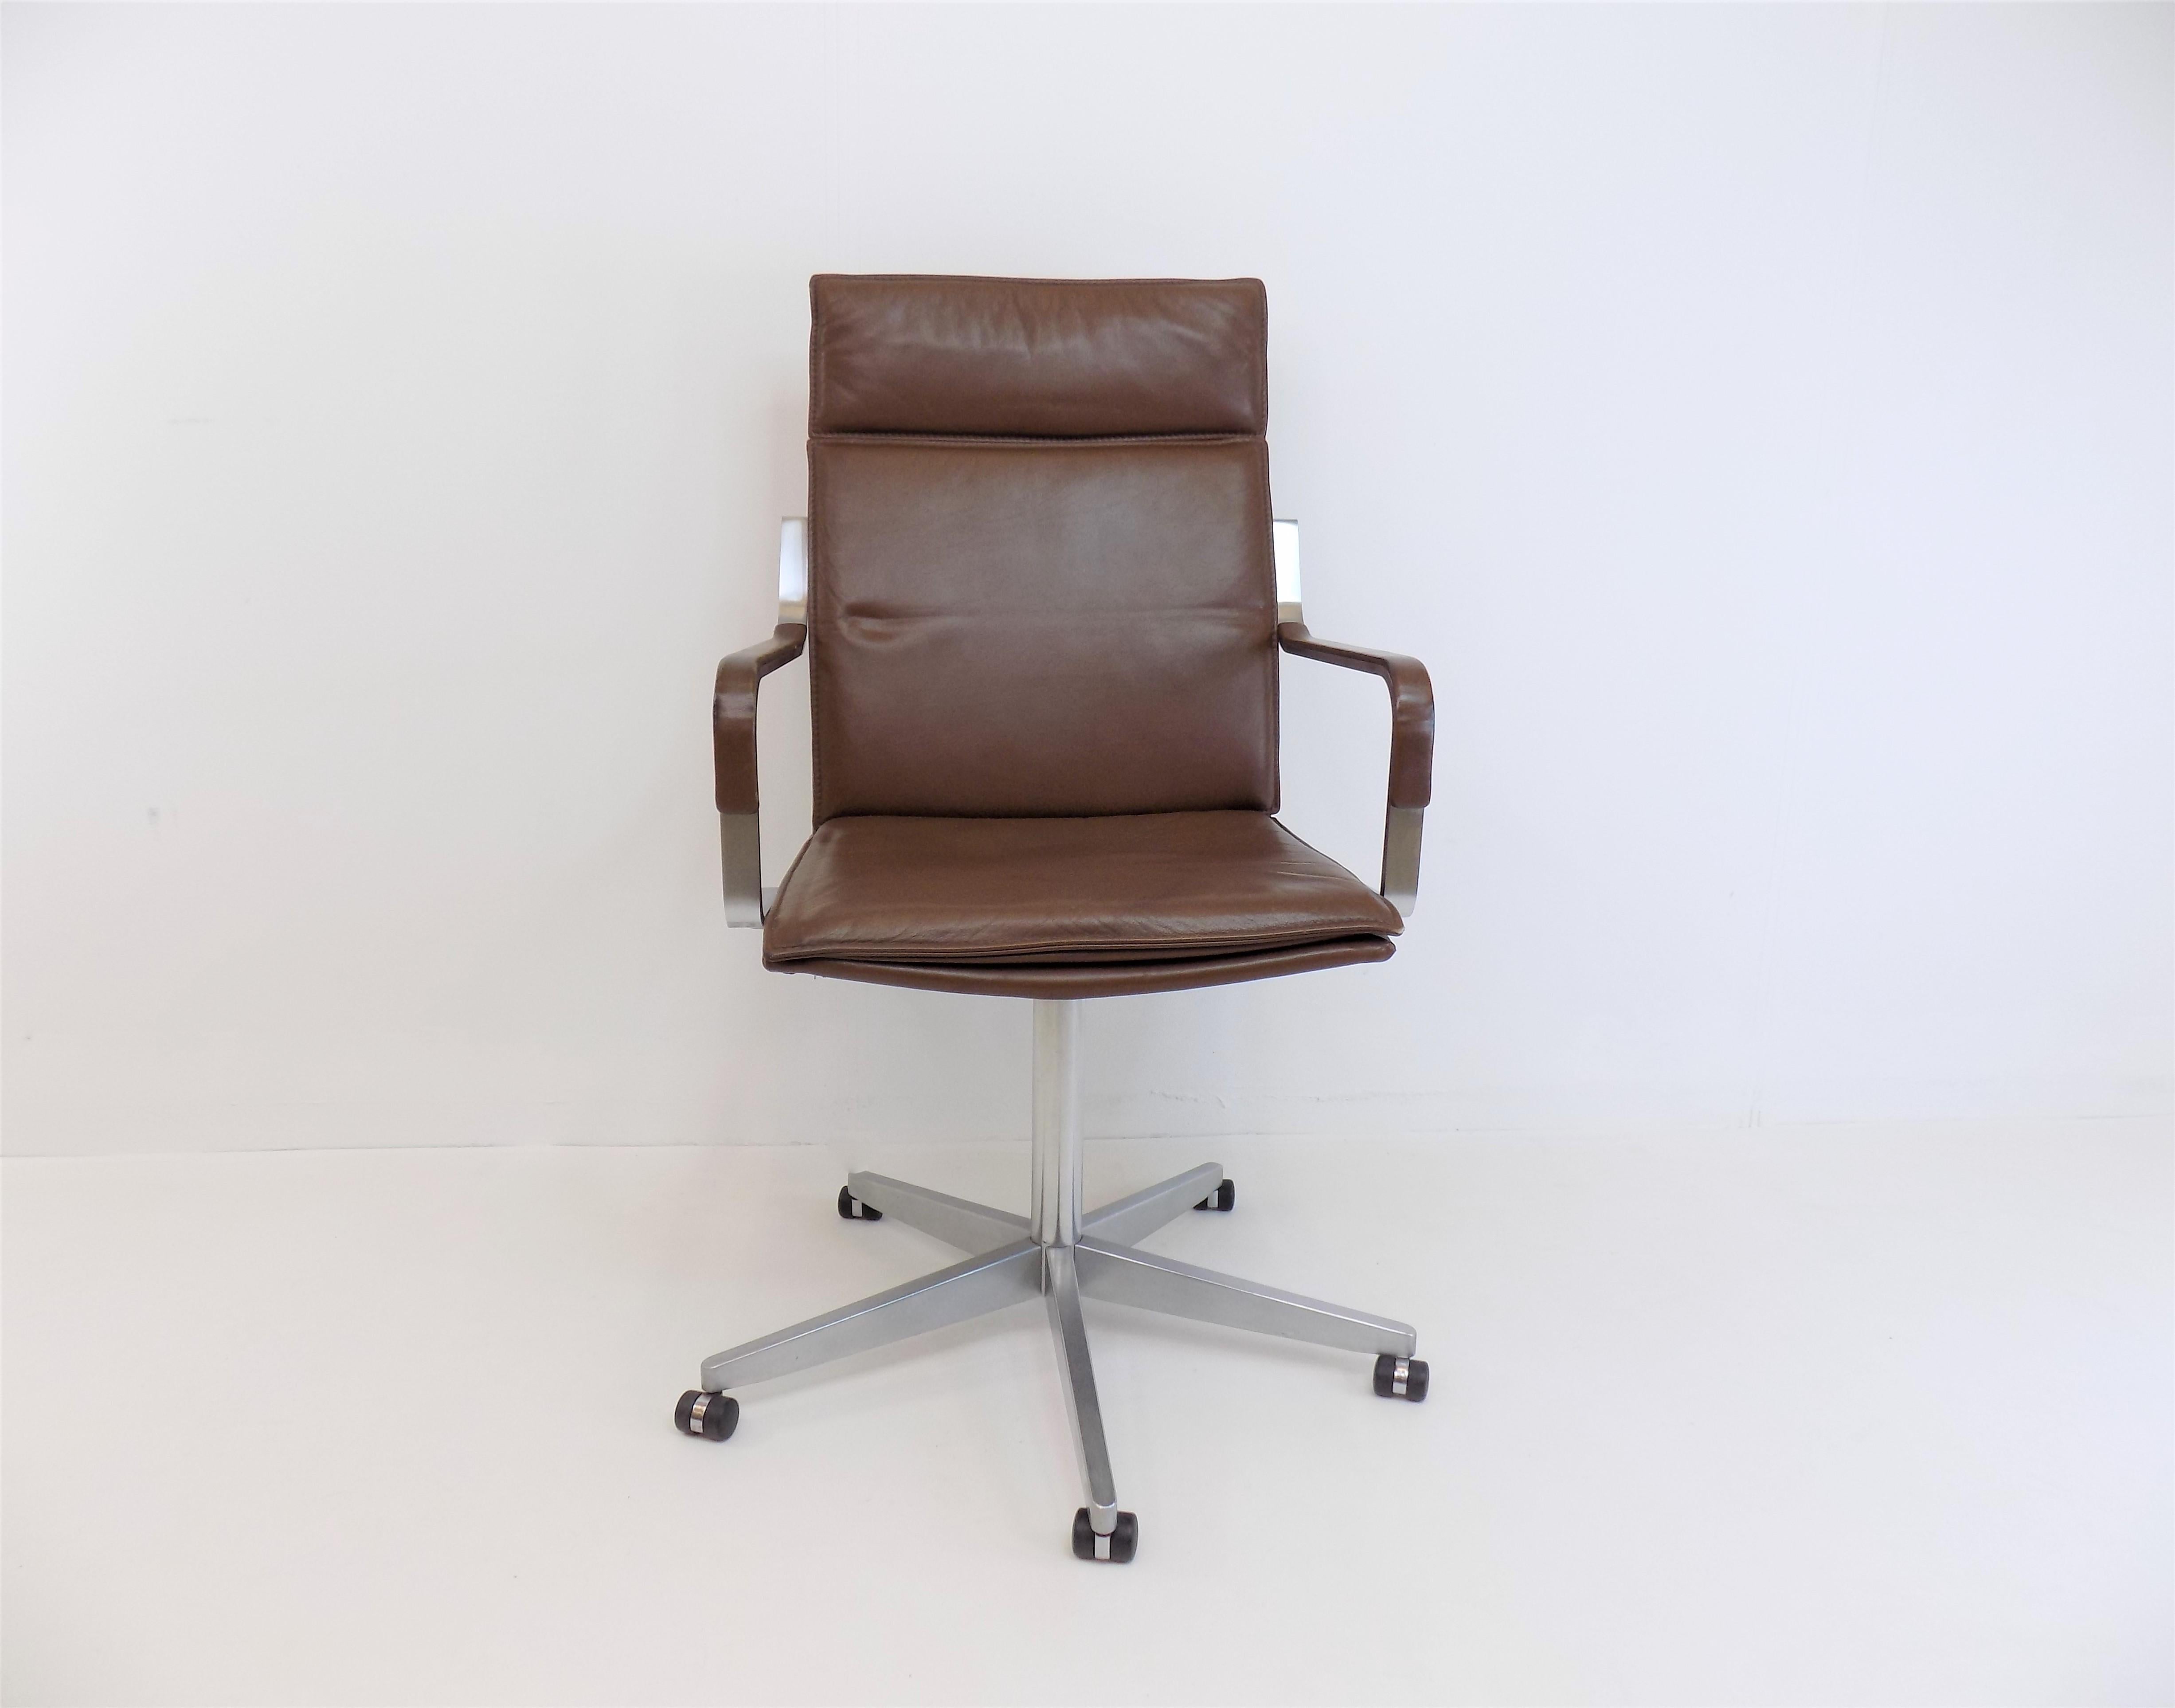 The Knoll office chair in cognac-colored leather is in good condition. The leather of the backrest and the seat and back cushions shows minimal signs of wear on the corners. The leather pads on the armrests show pressure points in the front area of